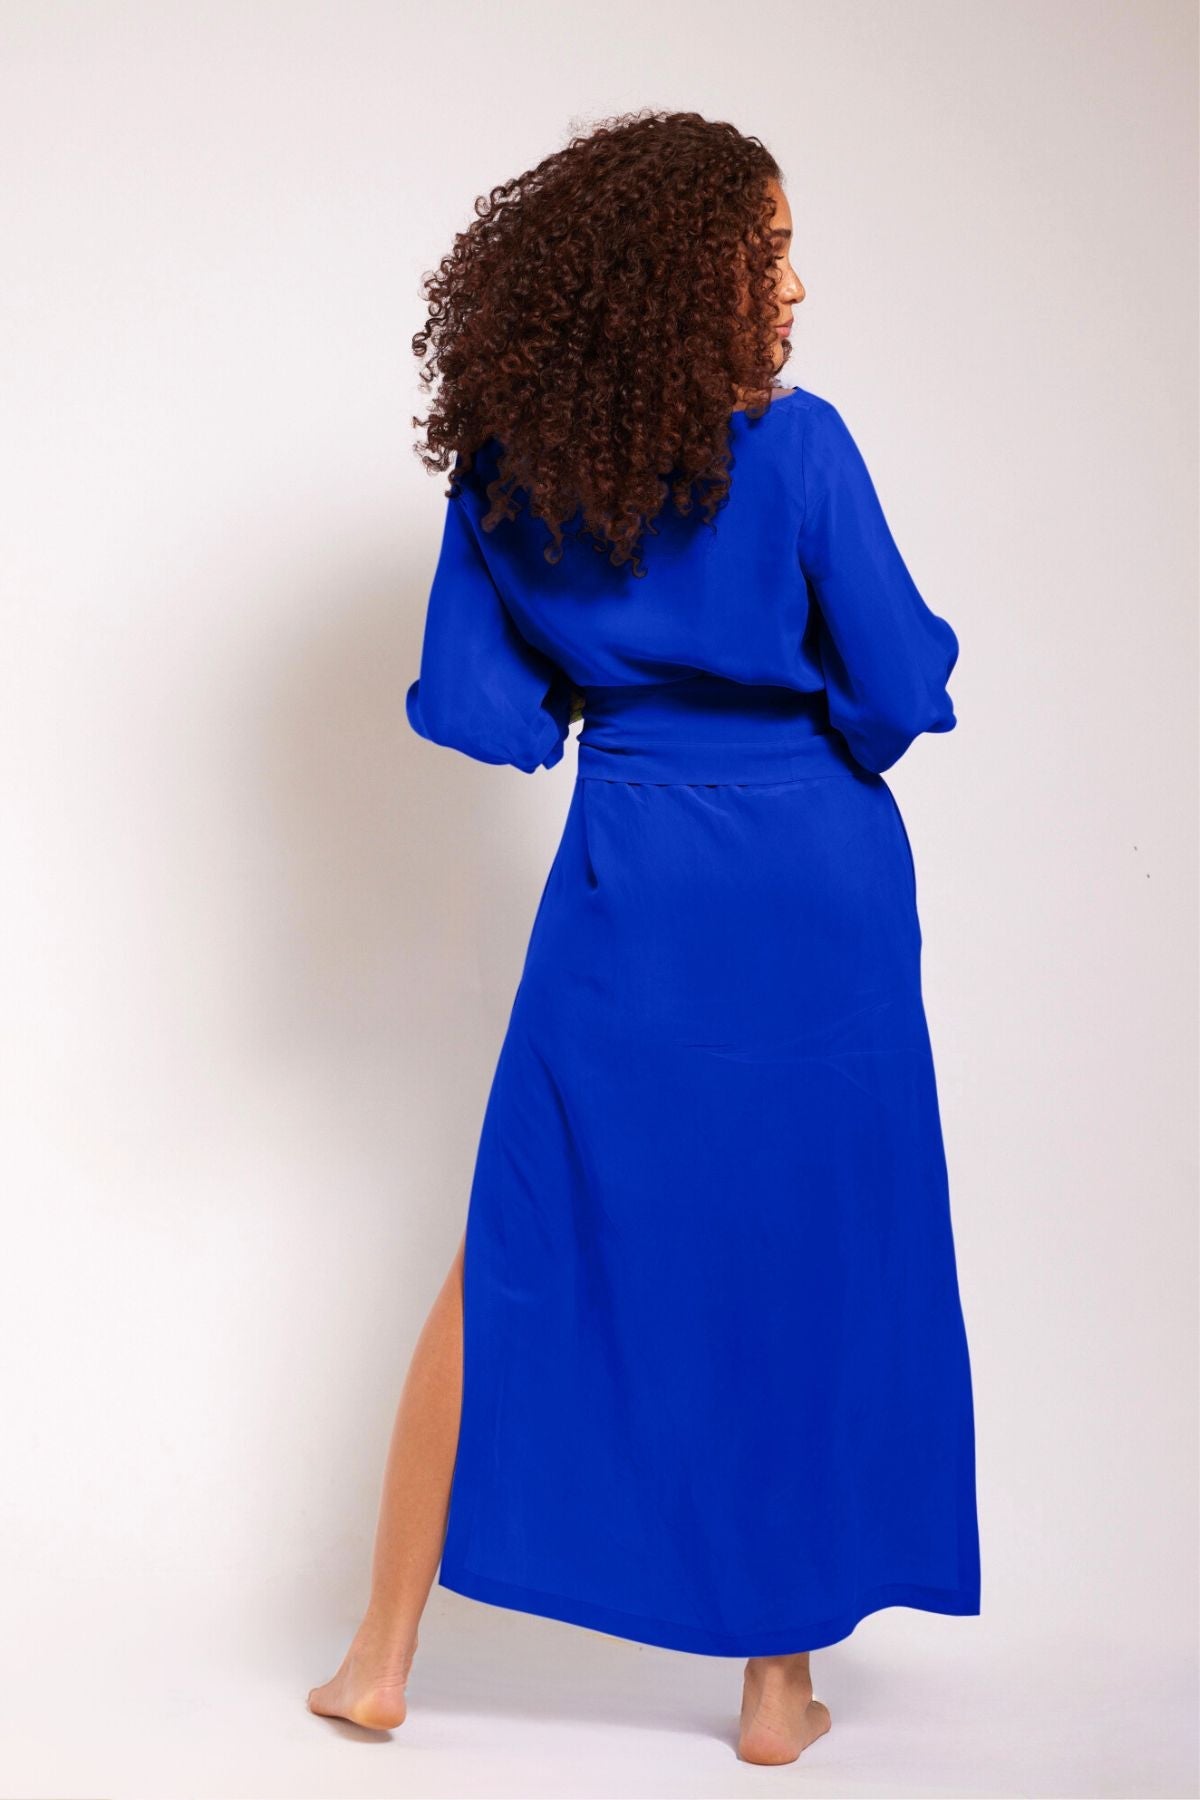 back view of woman wearing a royal blue kaftan duster with embroidered sleeves made from recycled materials